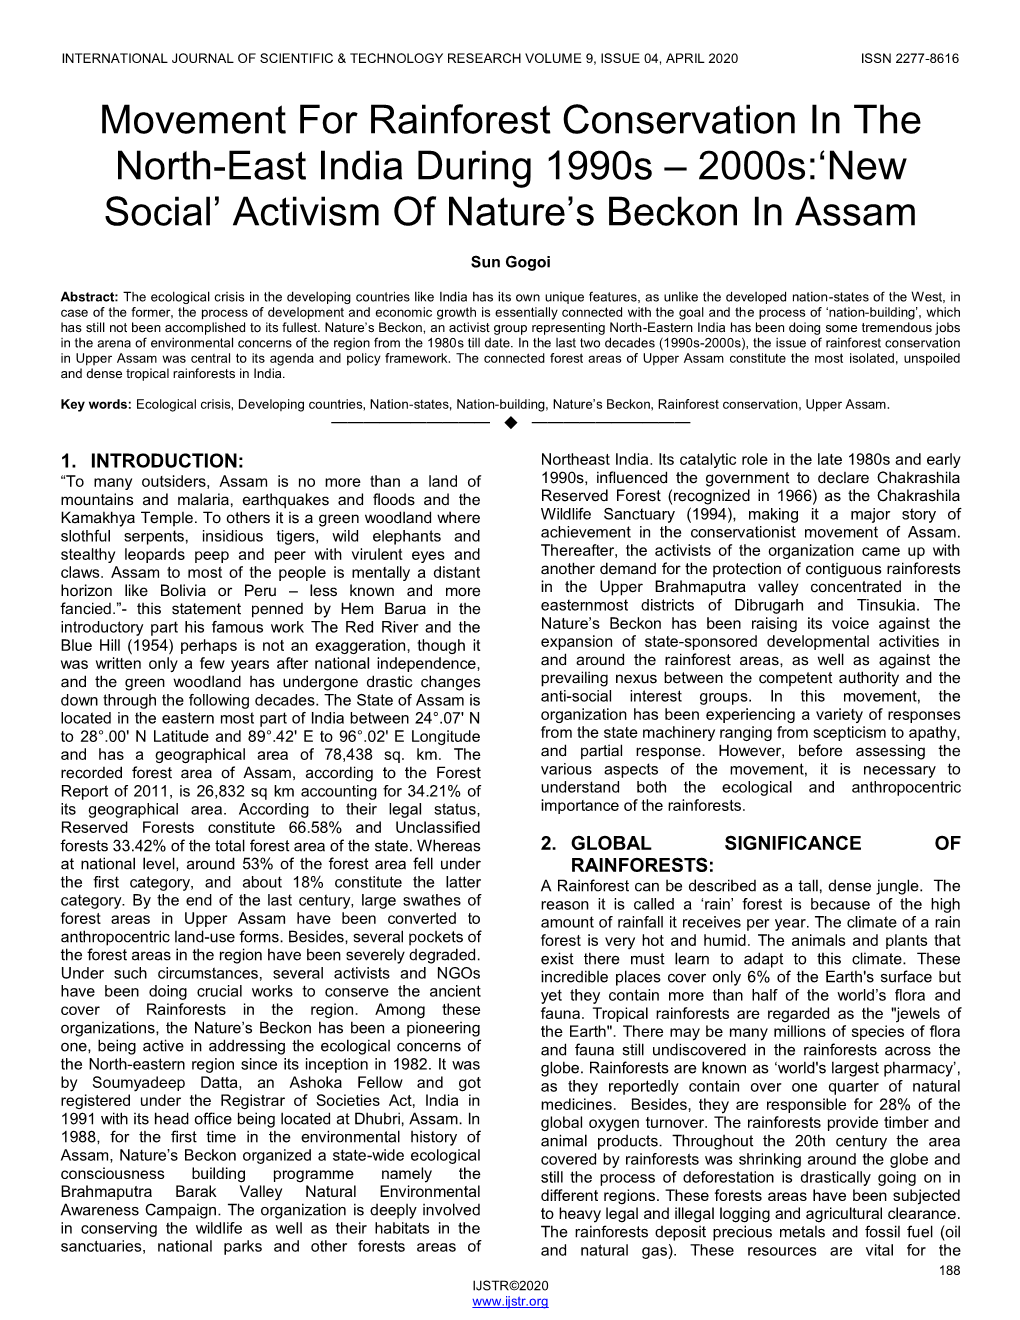 Movement for Rainforest Conservation in the North-East India During 1990S – 2000S:‗New Social‘ Activism of Nature‘S Beckon in Assam